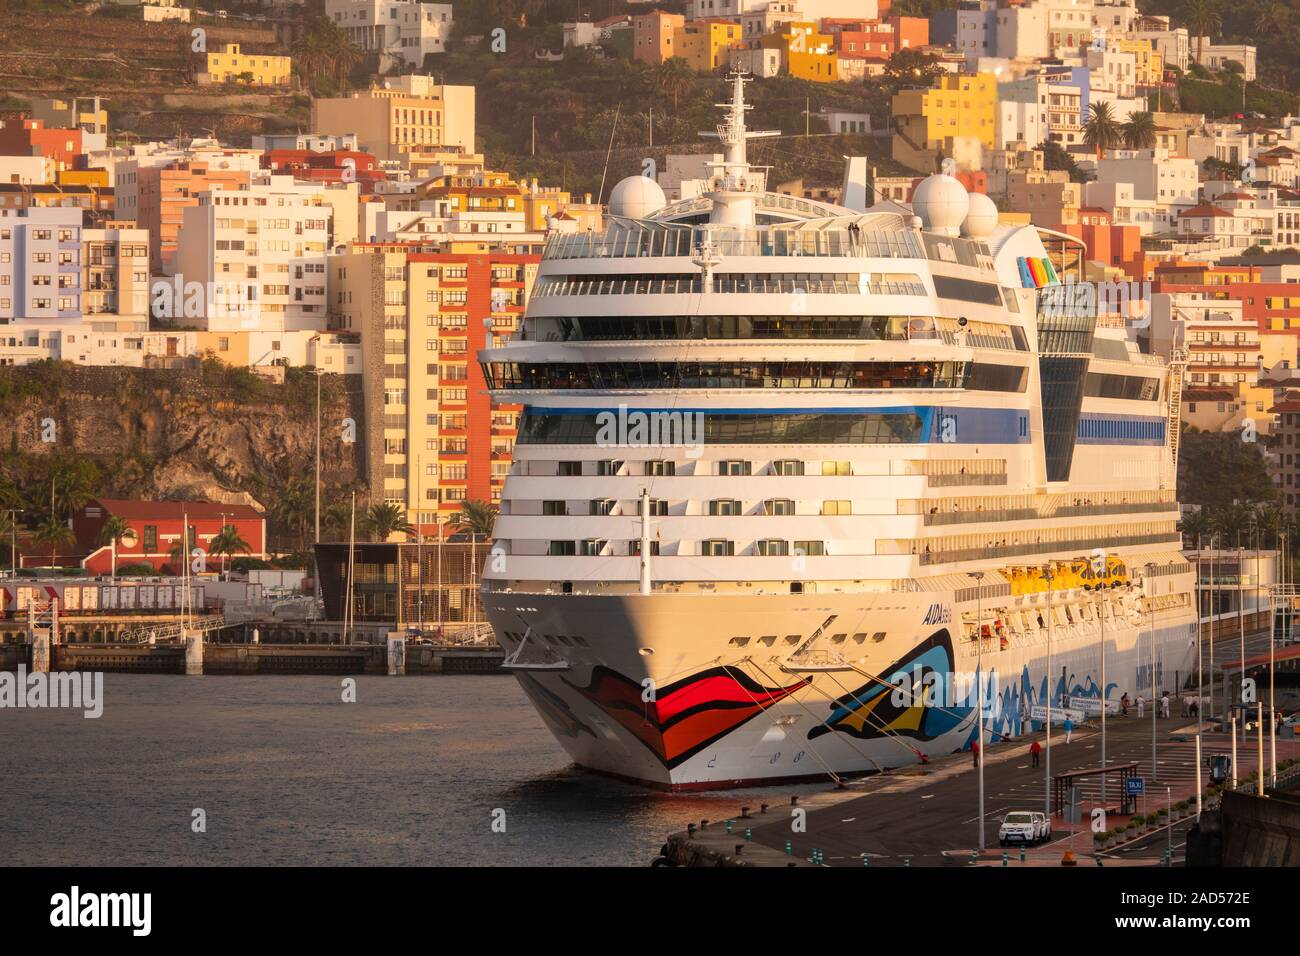 Cruise Ship, Aida Stella in the port of La Palma with houses in the background. Stock Photo